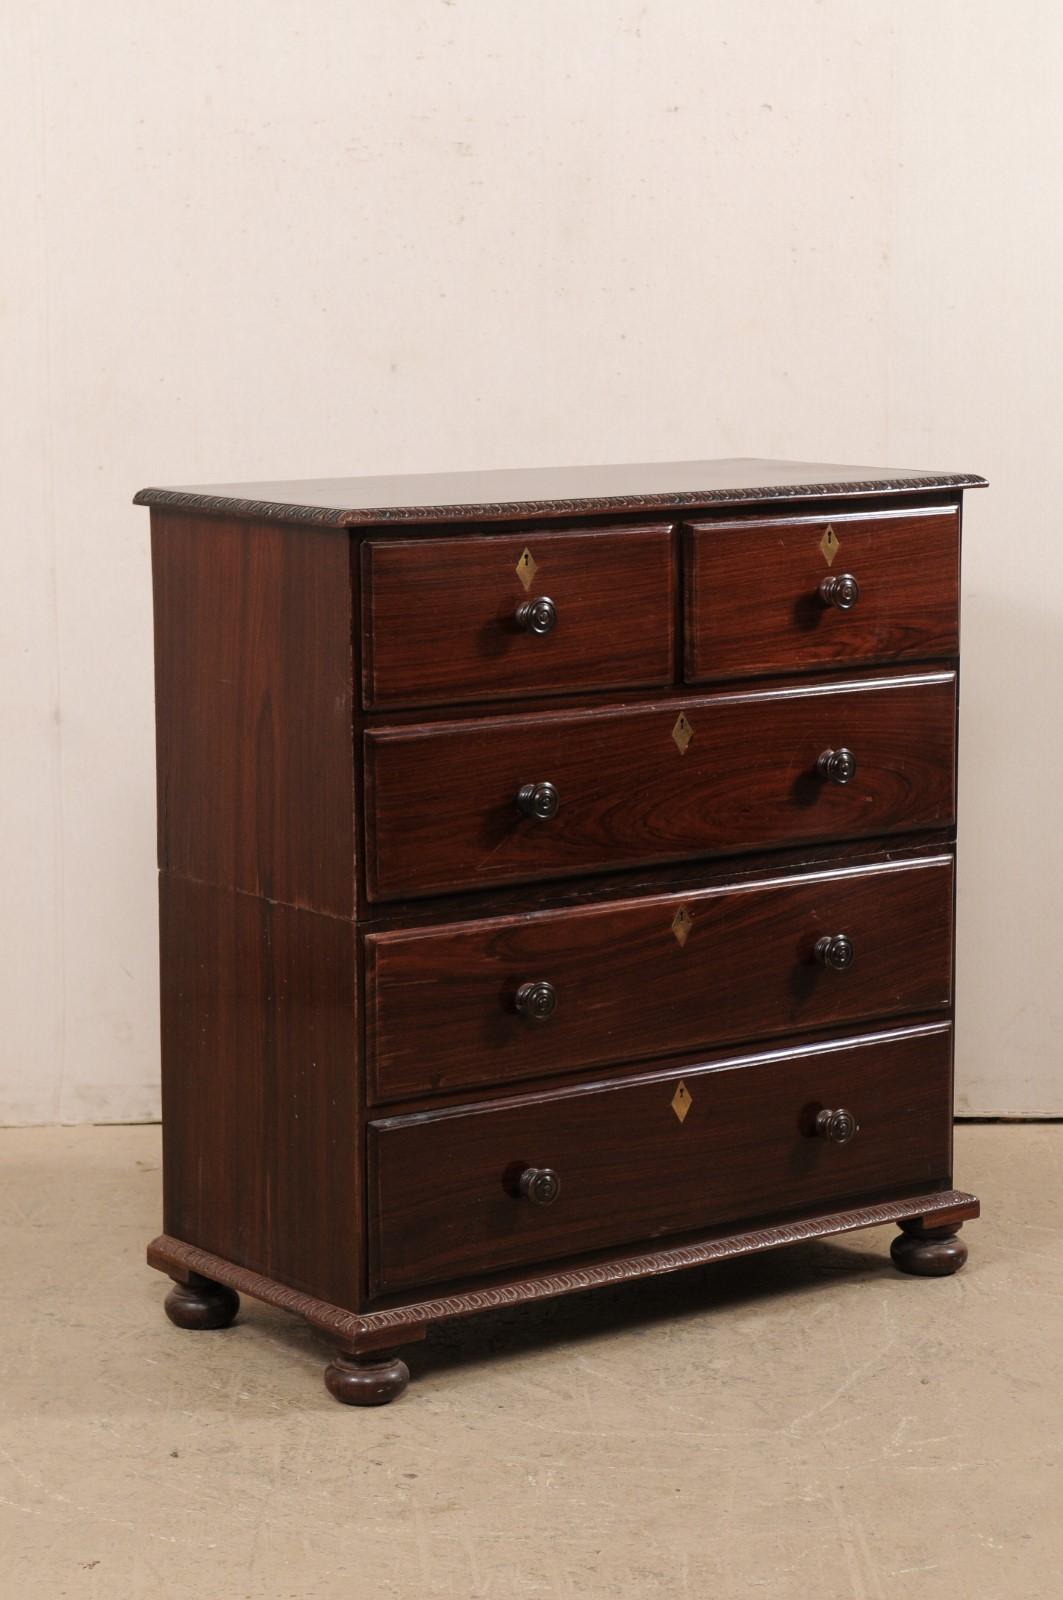 A British Colonial rosewood chest of drawers from the early 20th century. This antique chest from India is made of rosewood, giving it a beautifully rich presence. Egg-and-dart trim carvings accentuate the top lip and lower skirt. The cabinet houses